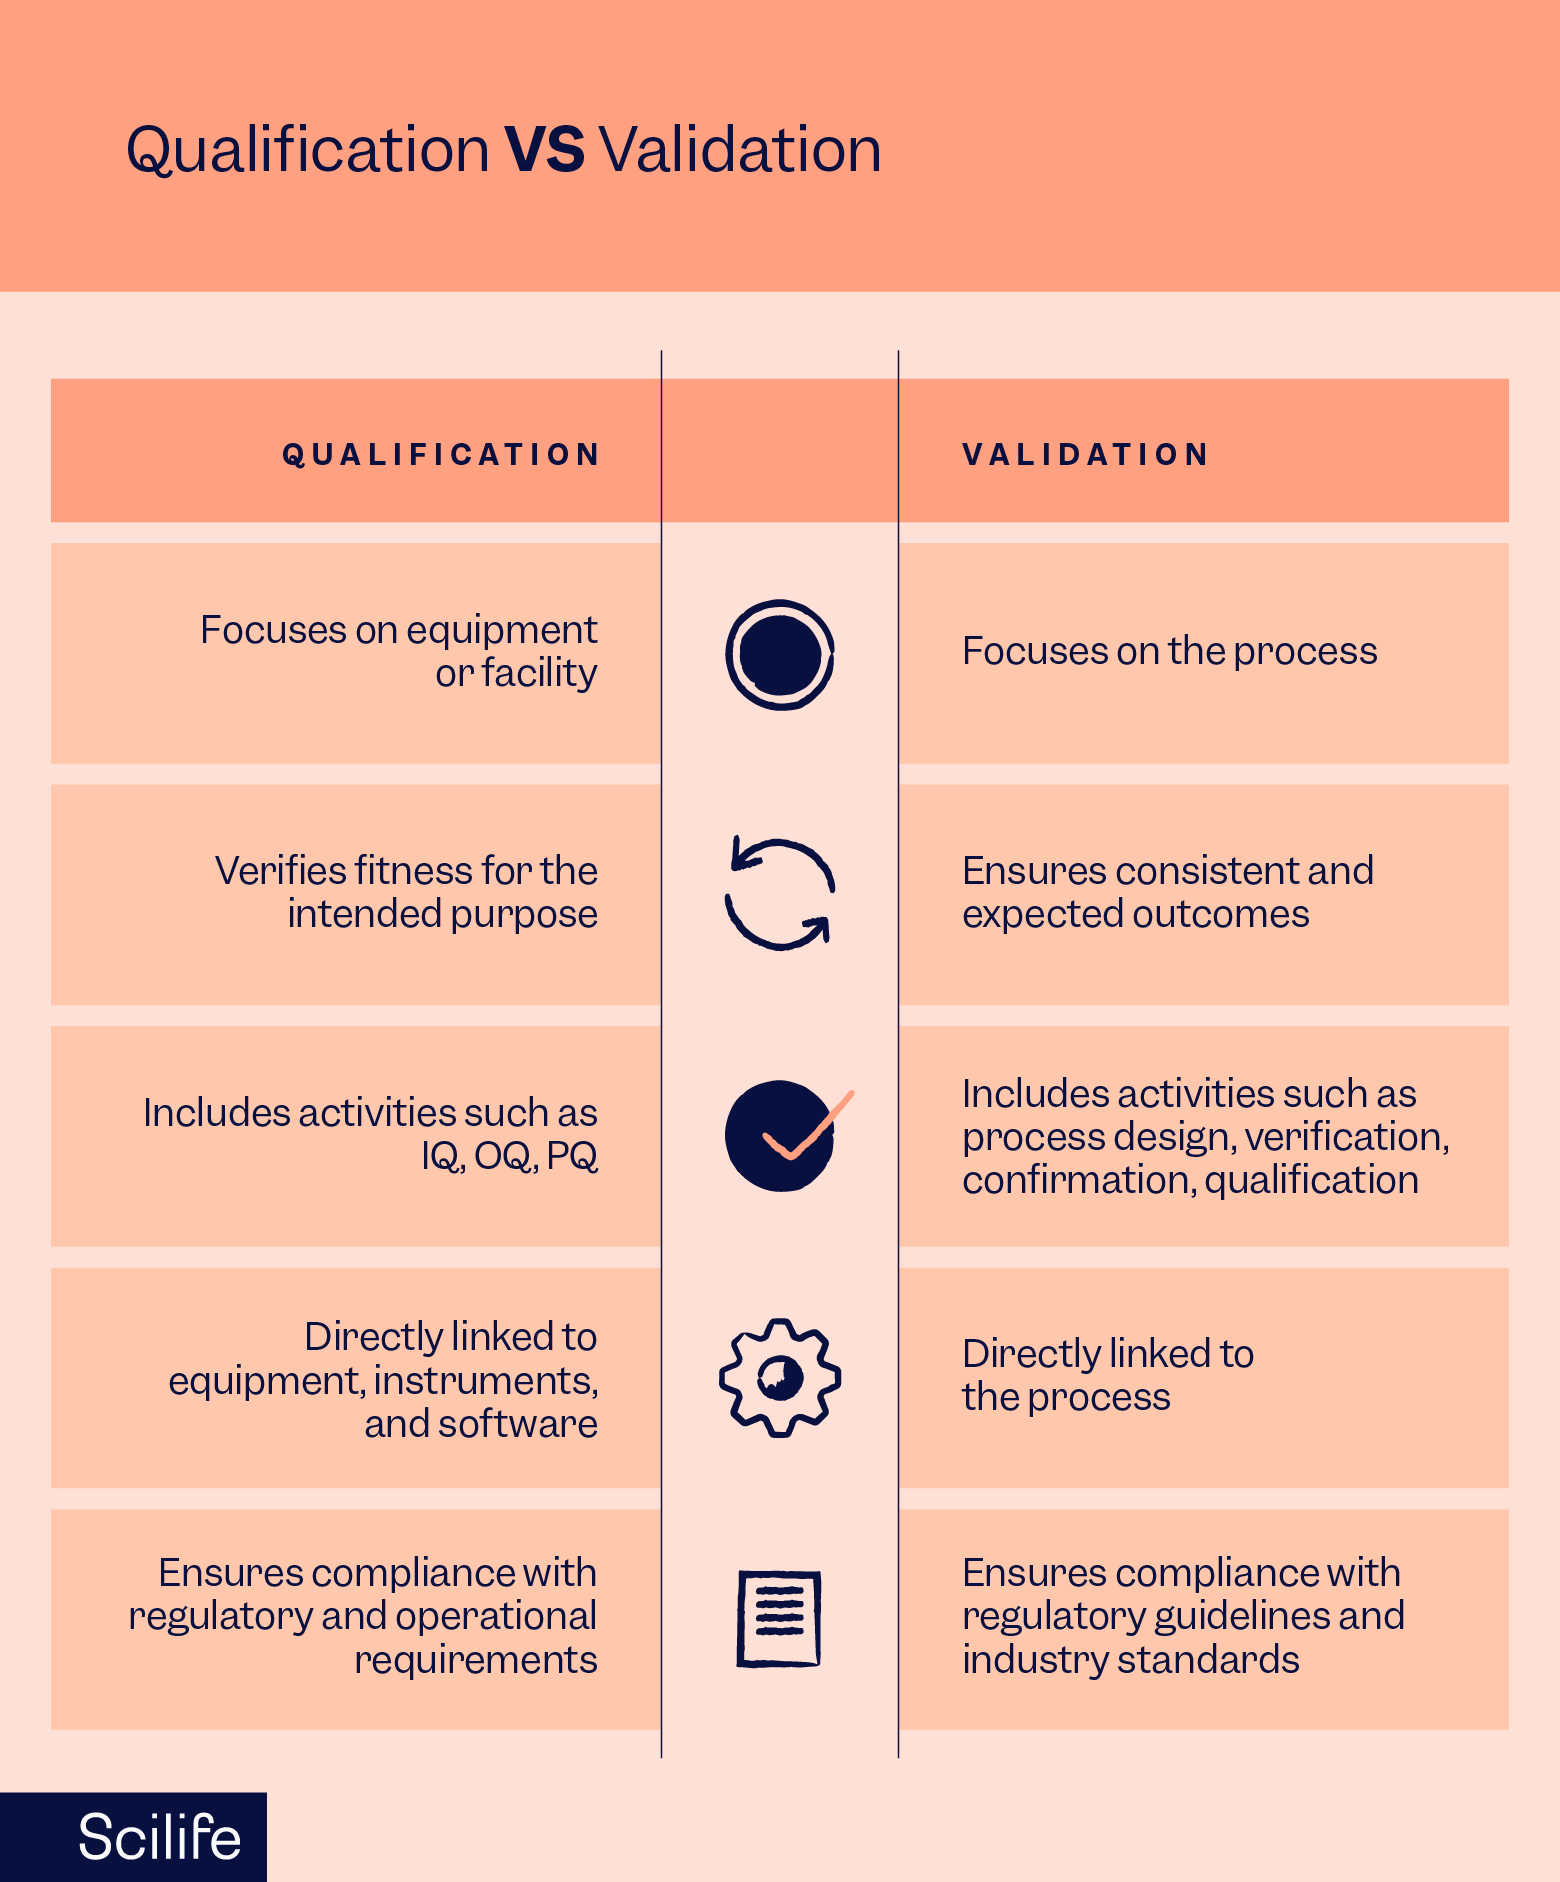 Infographic that shows the difference between qualification and validation according to EU GMP Annex 11 | Scilife